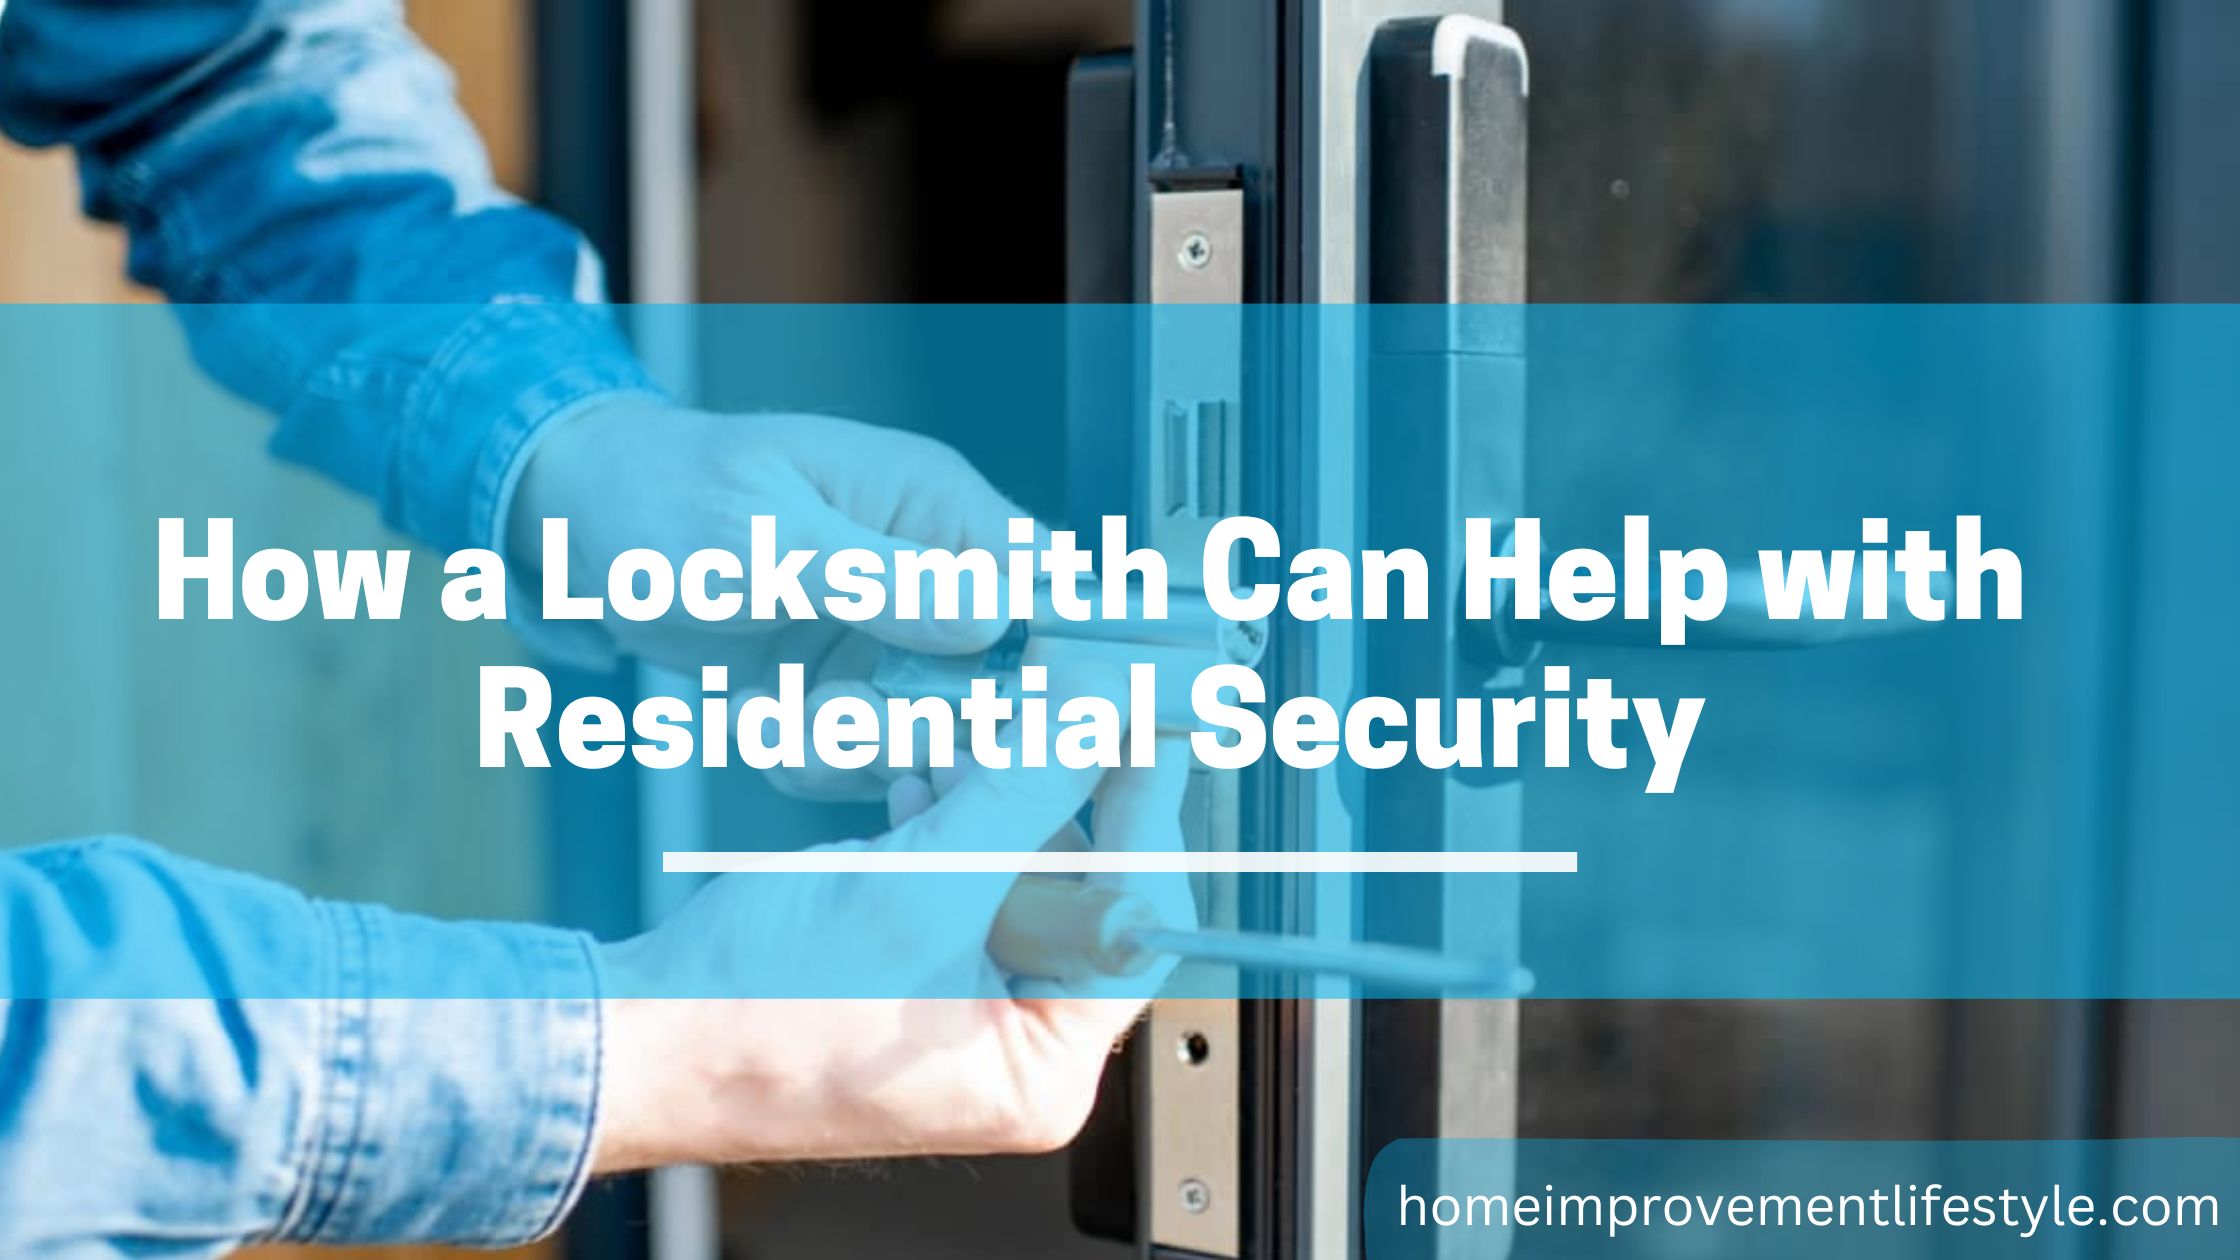 How a Locksmith Can Help with Residential Security